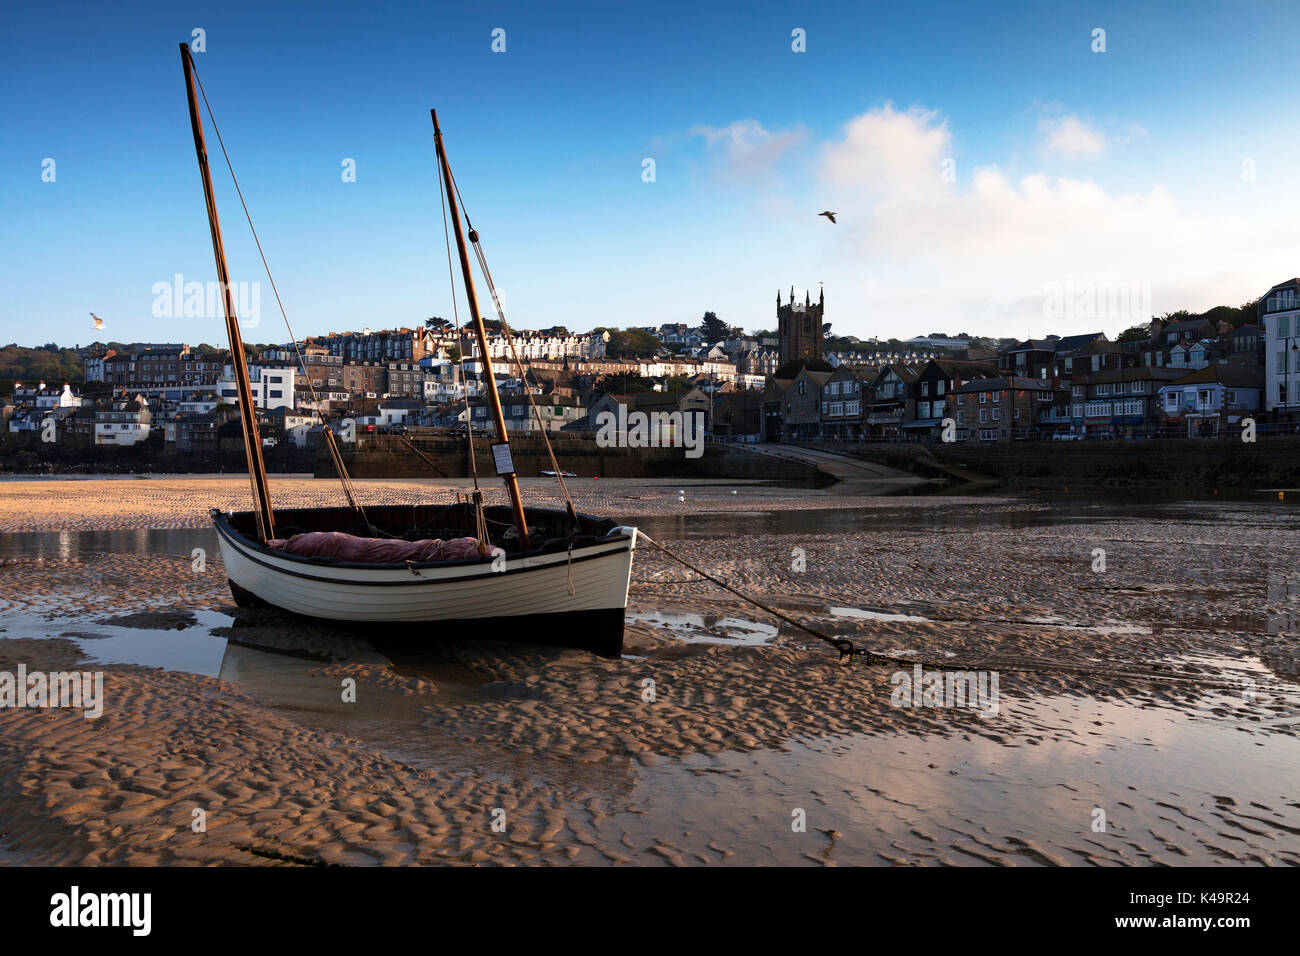 Boat In Harbor, Low Tide, St Ives, Cornwall, England, Uk Stock Photo